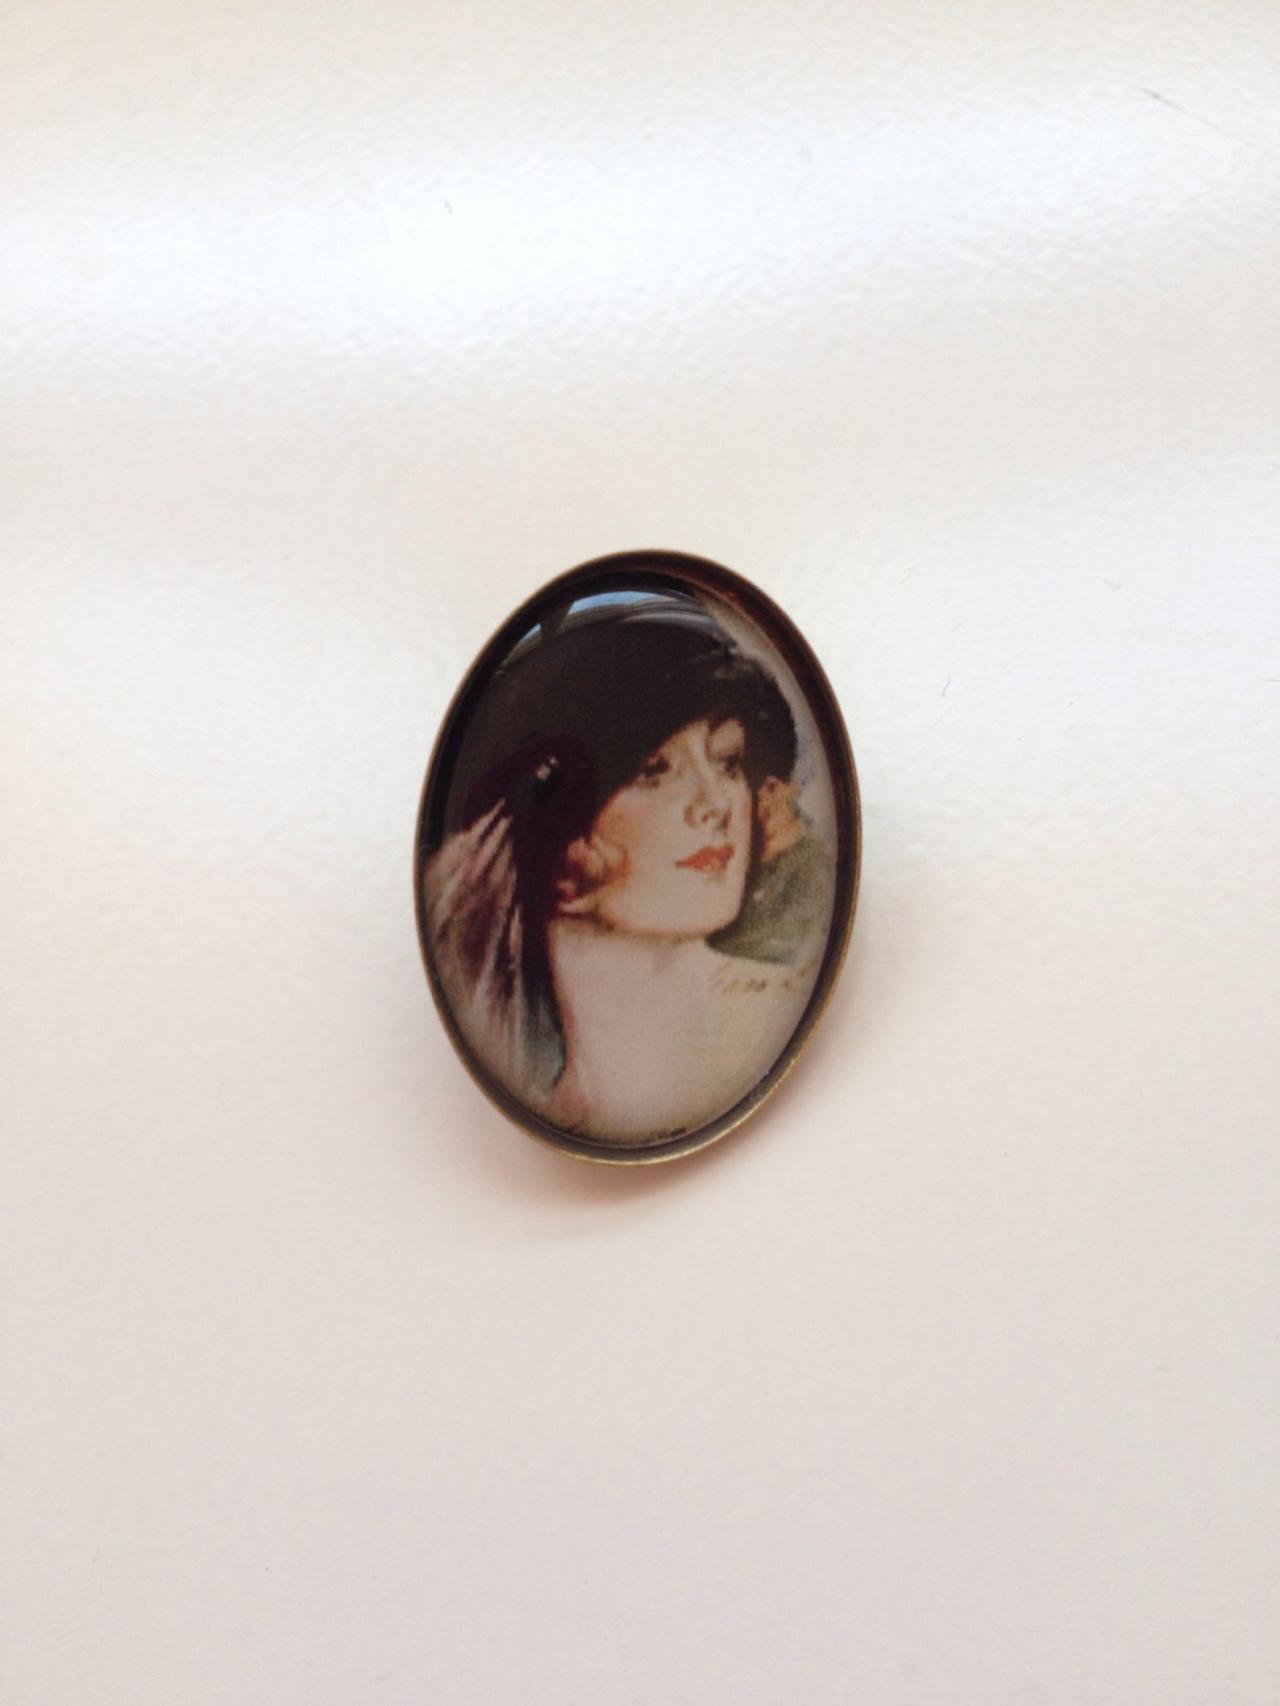 Pin 84 - old school pin old woman image brooch perfect gift vintage style autumn winter fashion